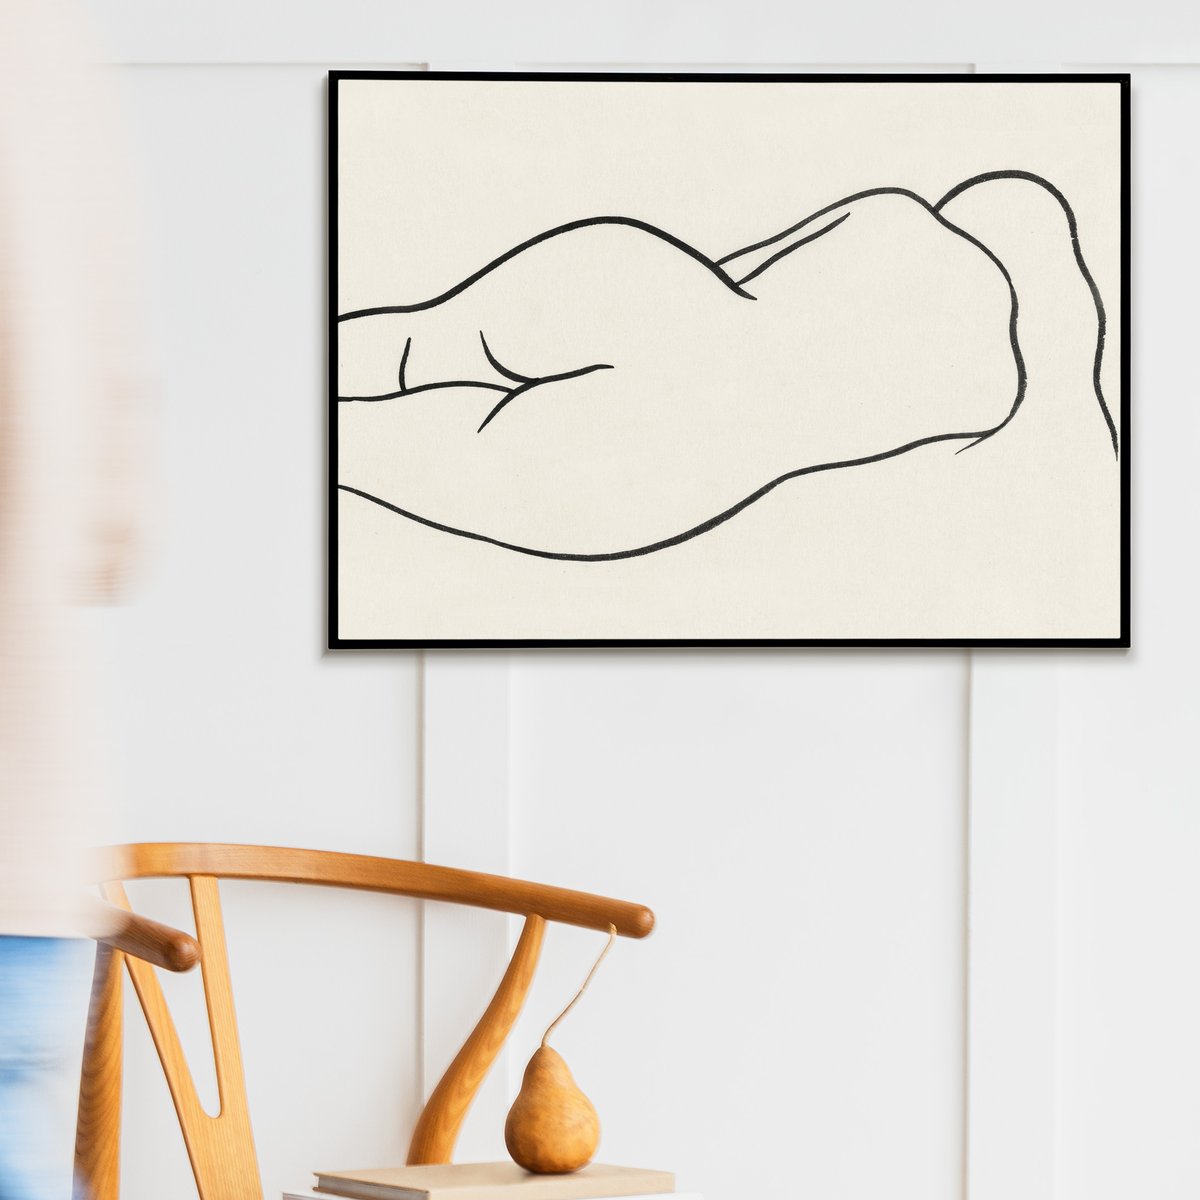 Put this one line drawing of a nude woman laying down on your wall now by clicking the link in our bio! #linkinbio #digitalprints #handmadehomedecor #blackwhiteprint #minimalistwalldecor #gallerywallart #lineart #onelinedrawing #homegifts #womanlineartprint #womanillustration